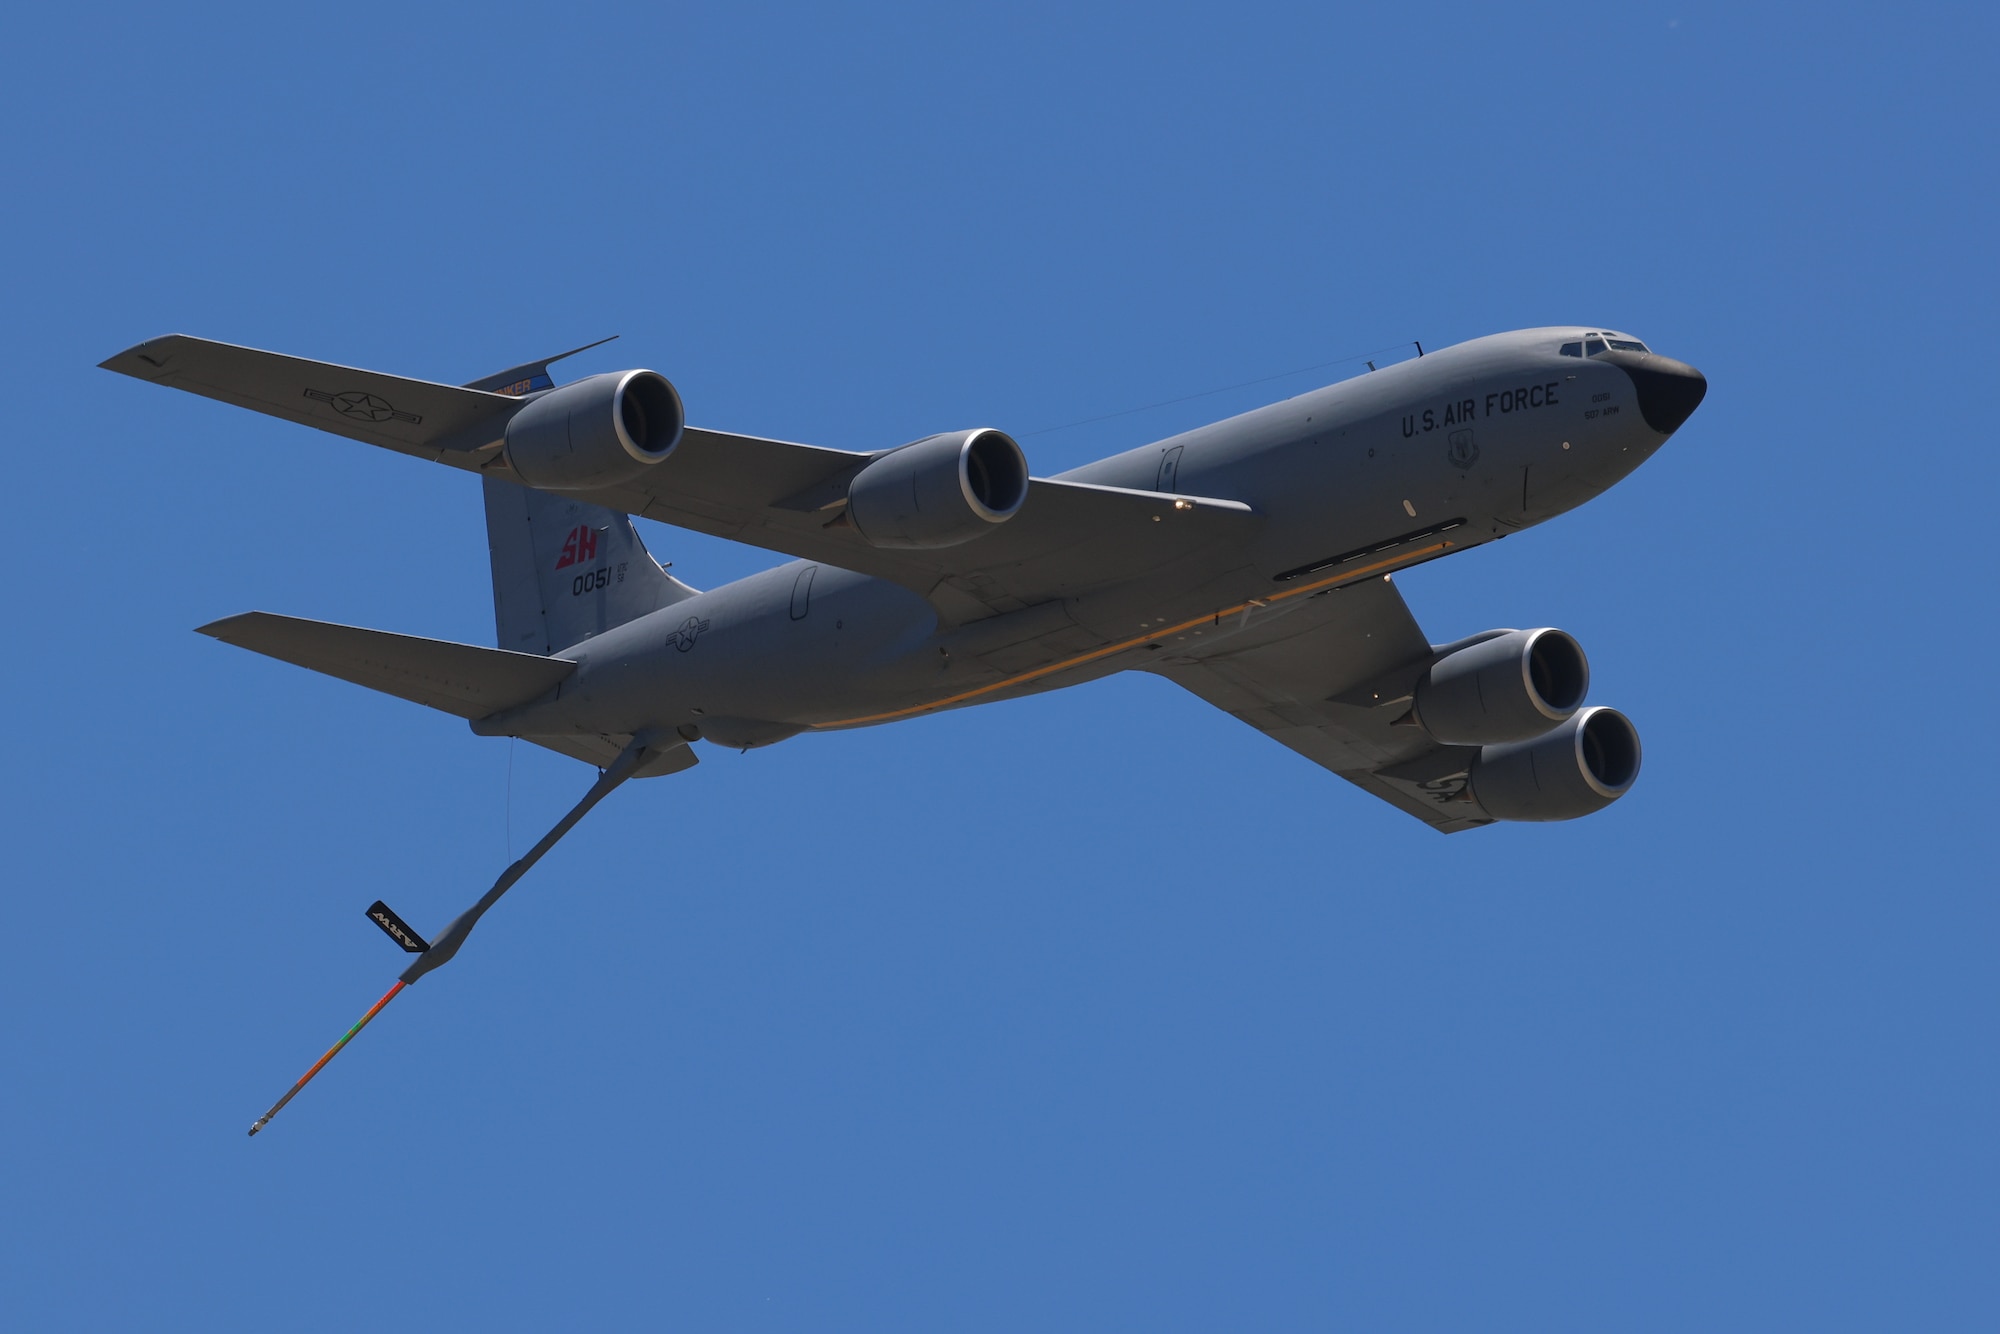 aircraft flys with refueling boom extended